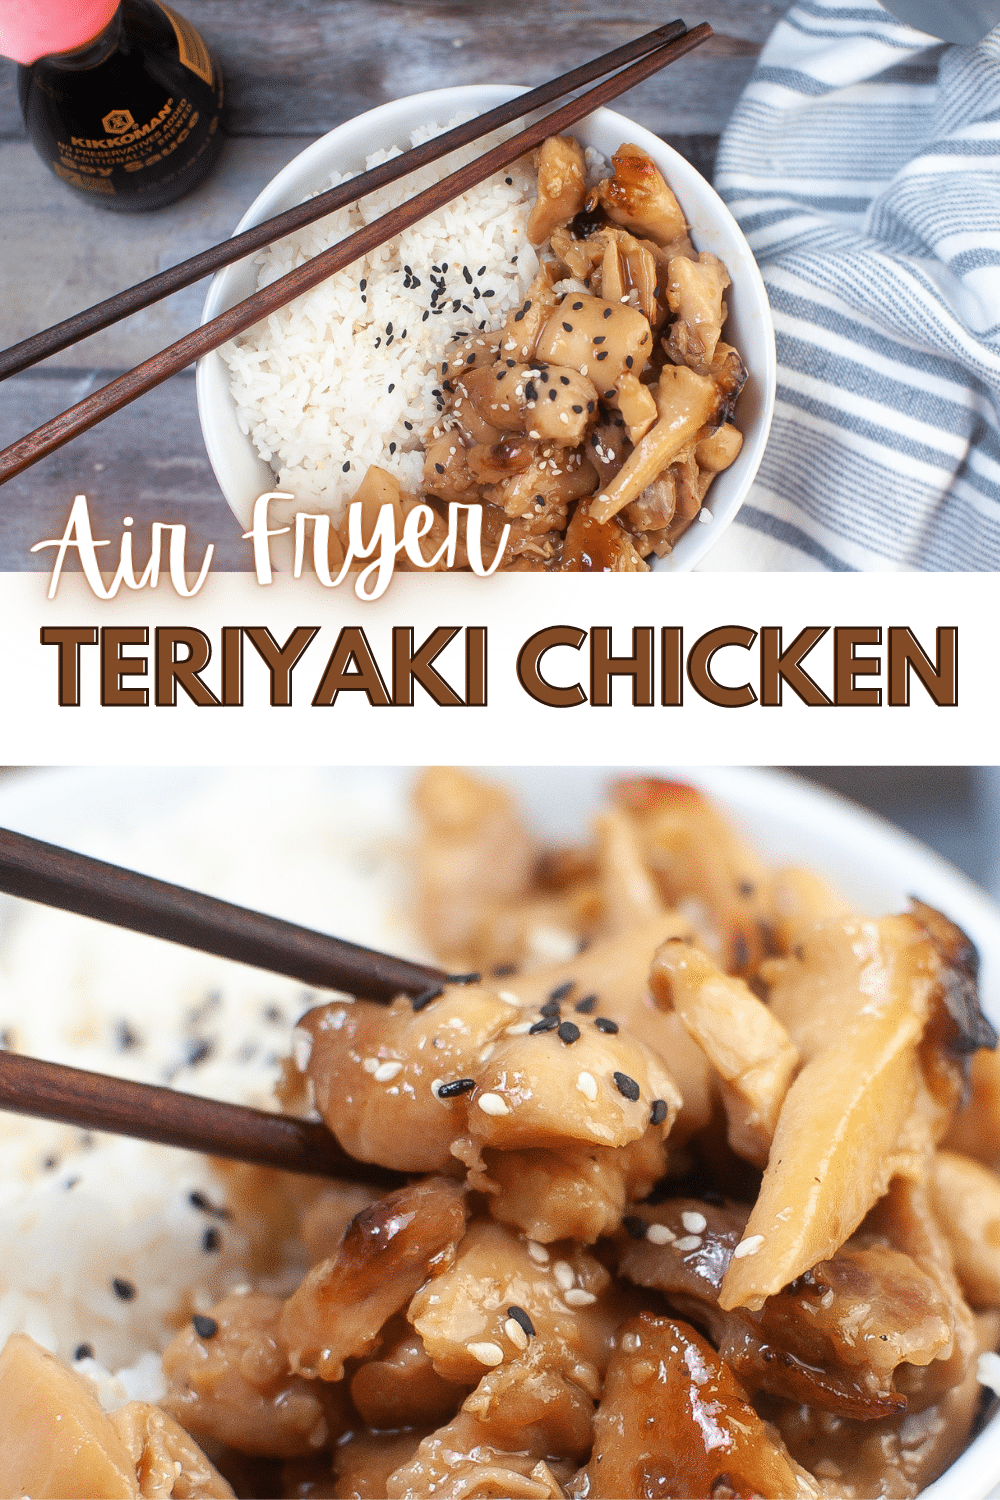 Air Fryer Teriyaki Chicken is a delicious and healthy recipe that can be enjoyed at any time. It's a takeout favorite you can make at home. #airfryerteriyakichicken #airfryer #teriyakichicken #takeoutathome via @wondermomwannab